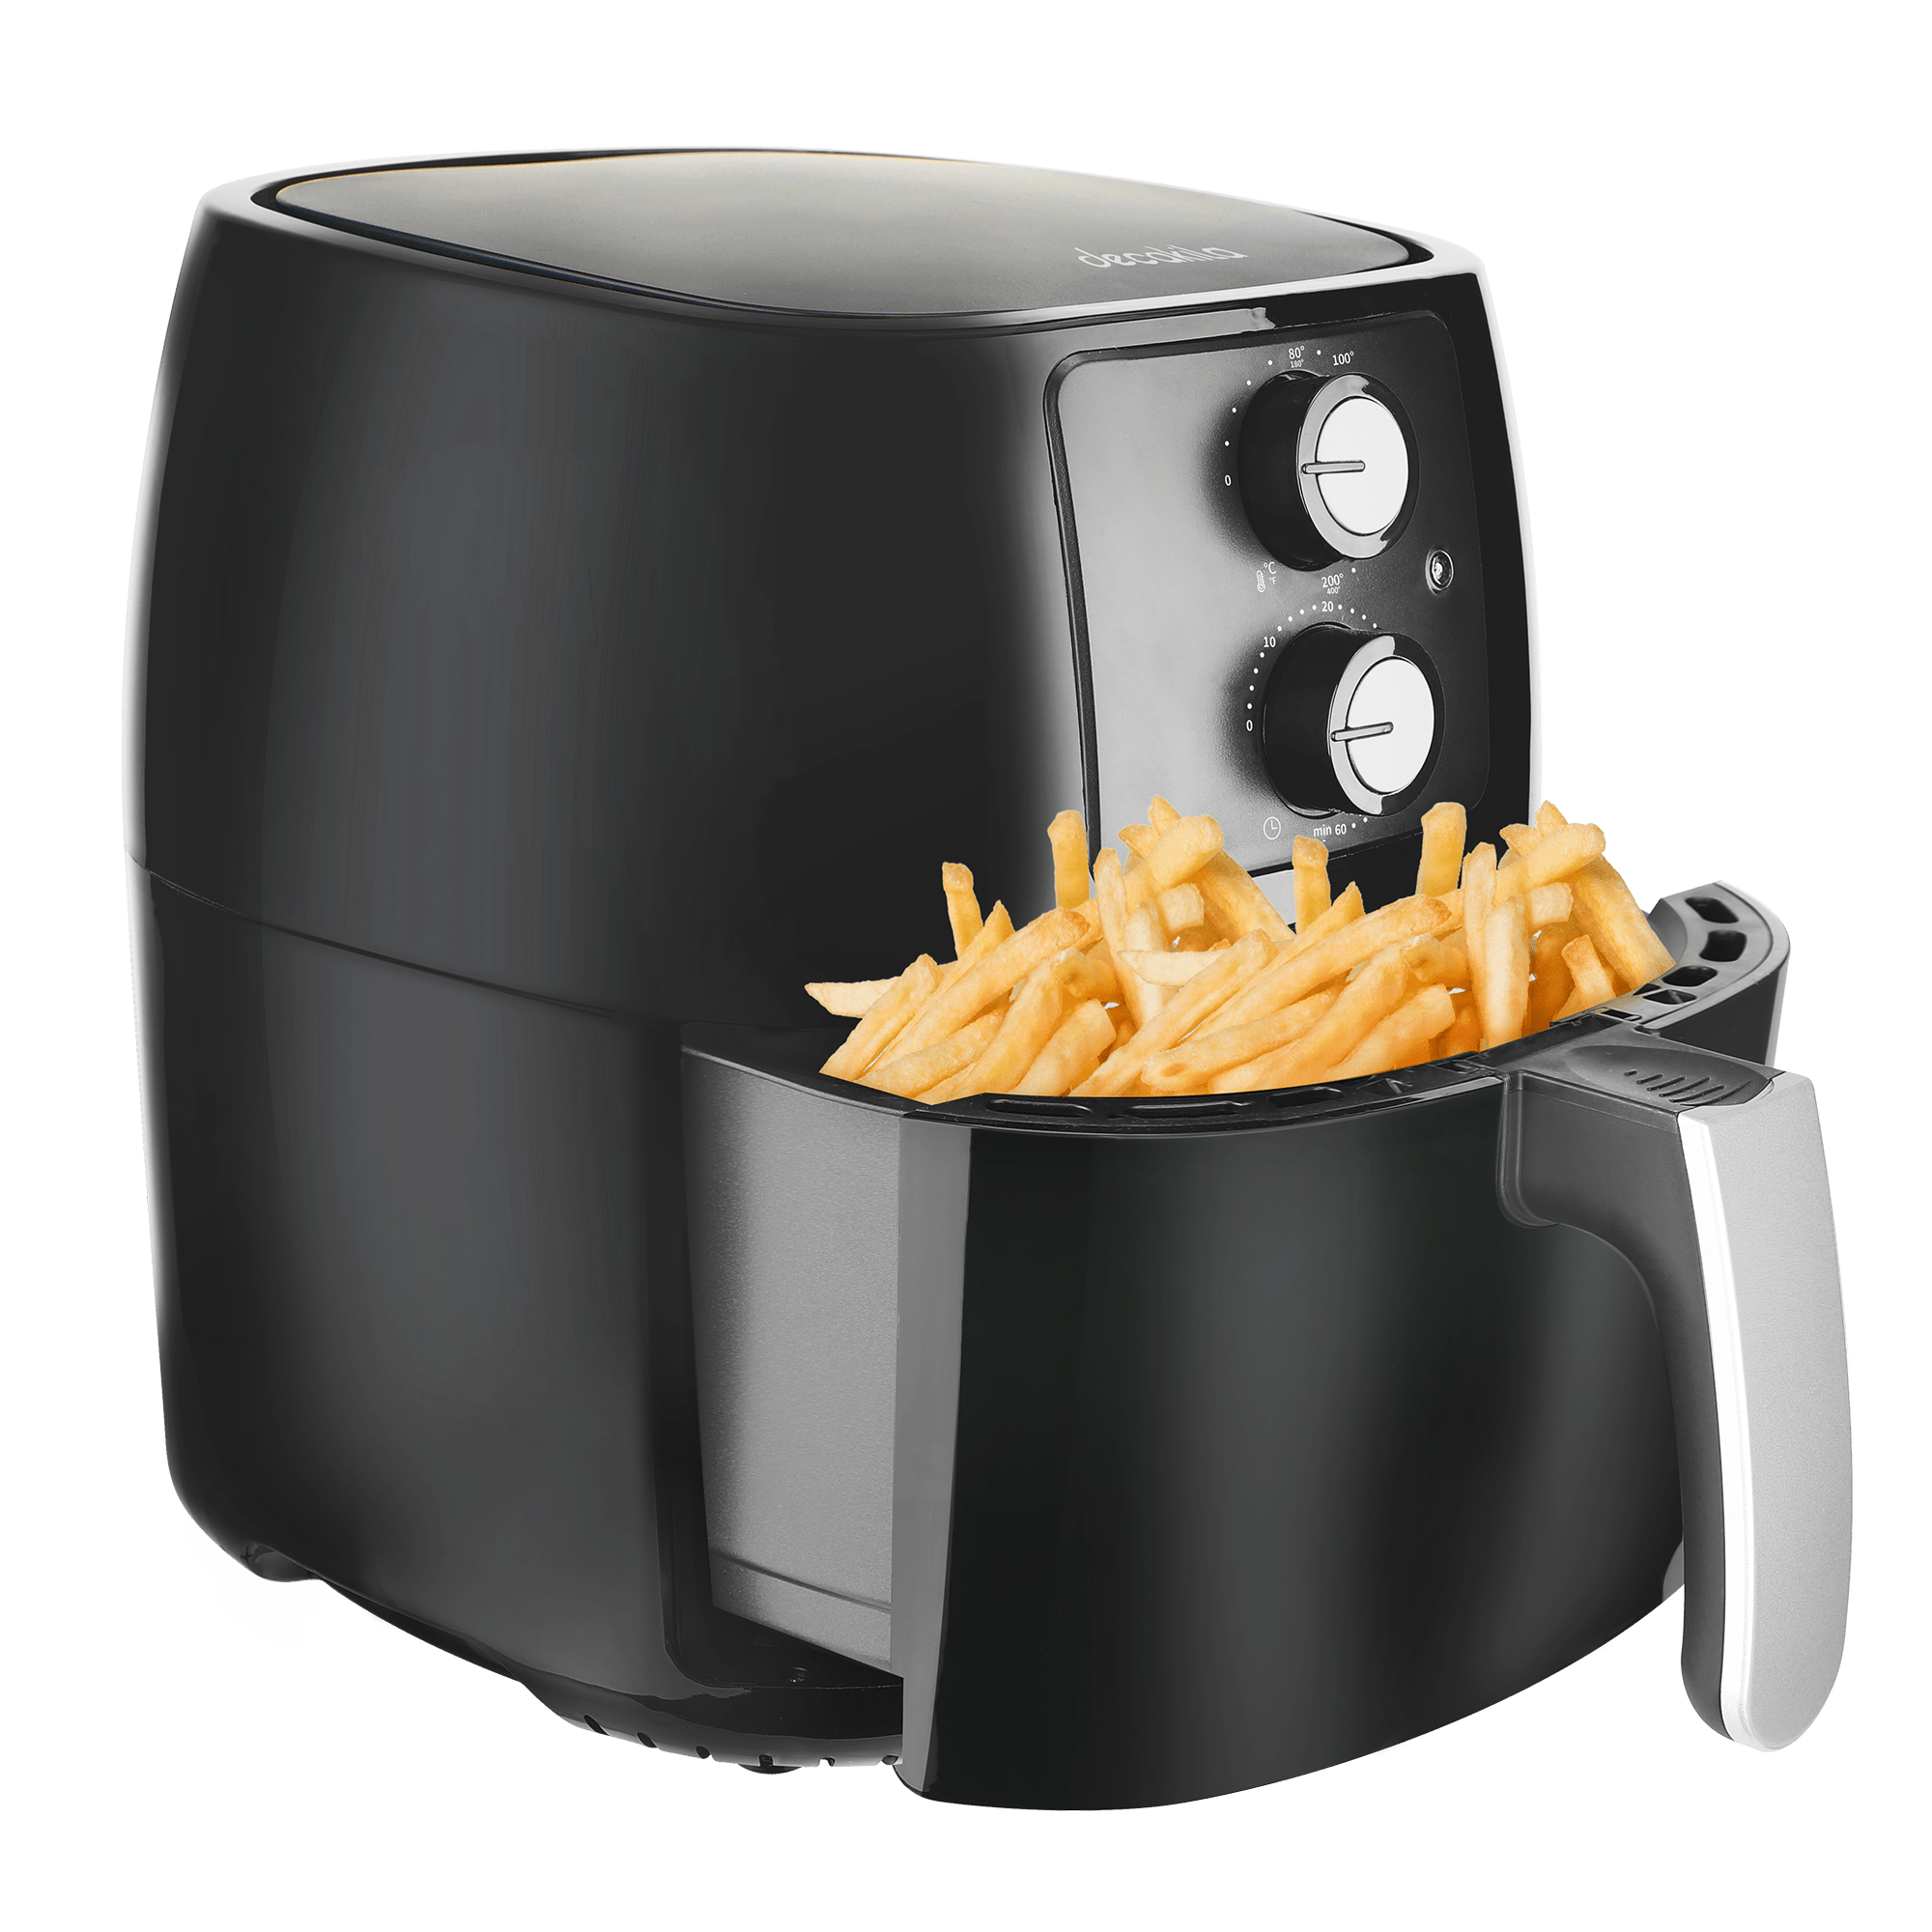 Buy Decakila 4.5L Air Fryer 1400W - KEEC073R in Ghana | Supply Master Kitchen Appliances Buy Tools hardware Building materials